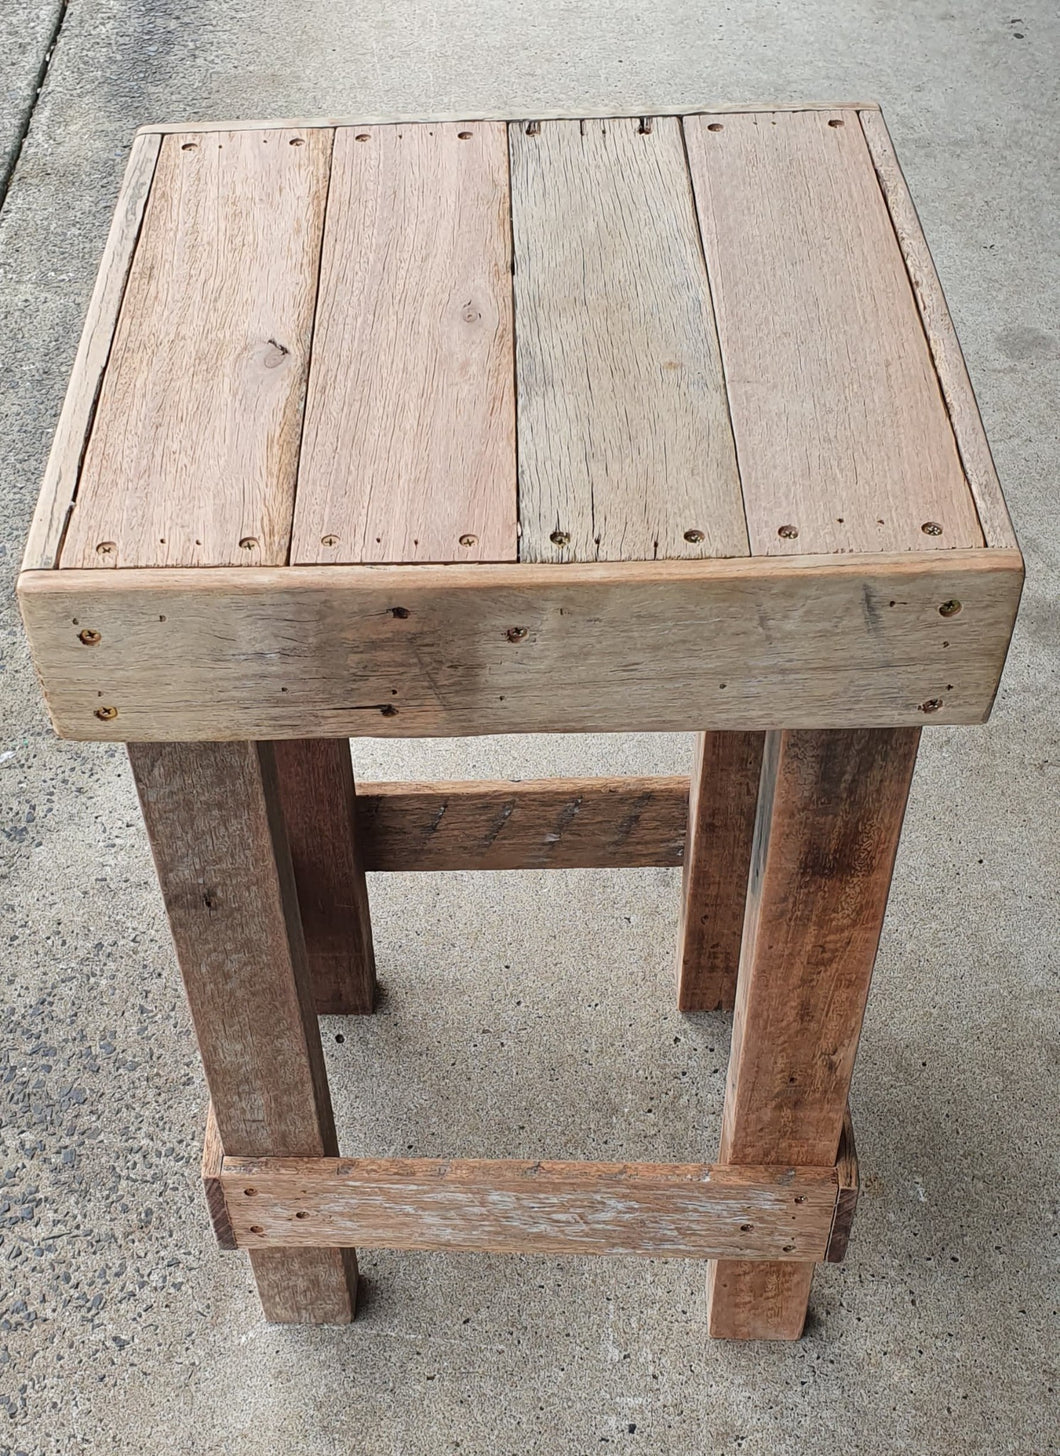 440mm bar stool standard wooden recycled